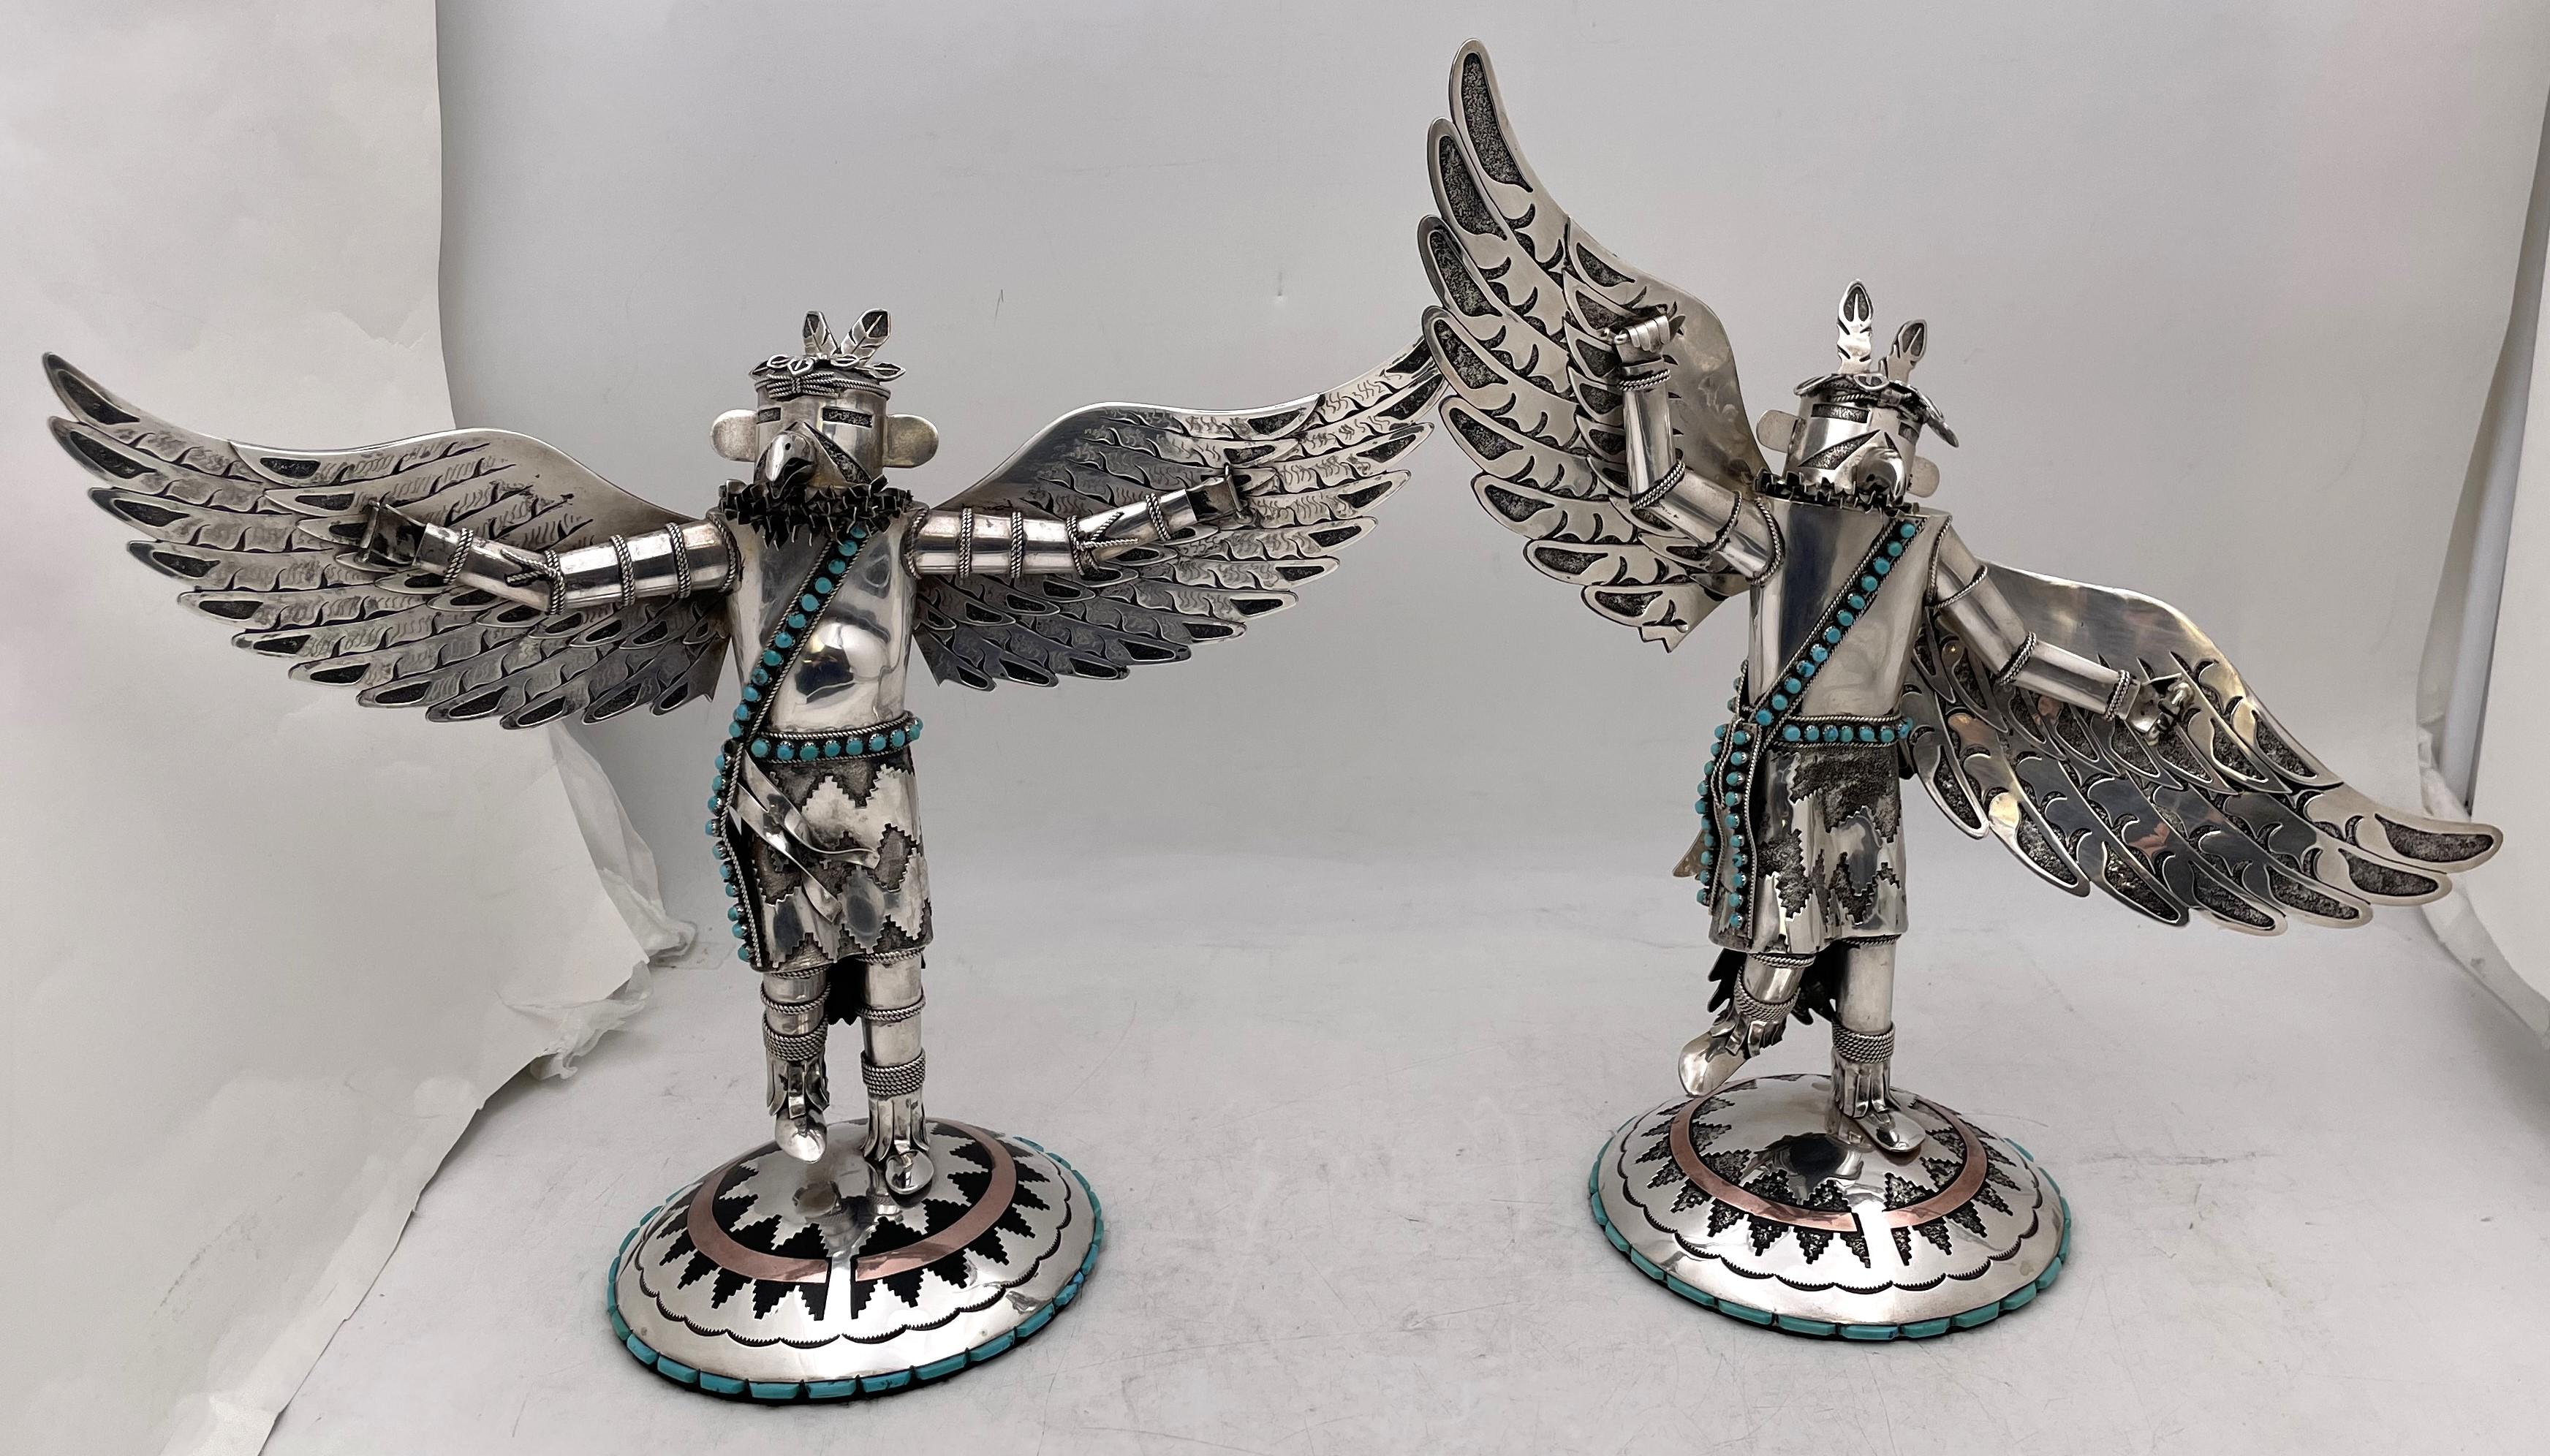 Rare Wilford Begay, Navajo Native American, pair of unique sterling silver, copper, and inlaid turquoise sculptures, representing Kachina bird figures. Exquisitely crafted with great detailing, the tallest measures 14 3/4'' in height by 5 7/8'' in